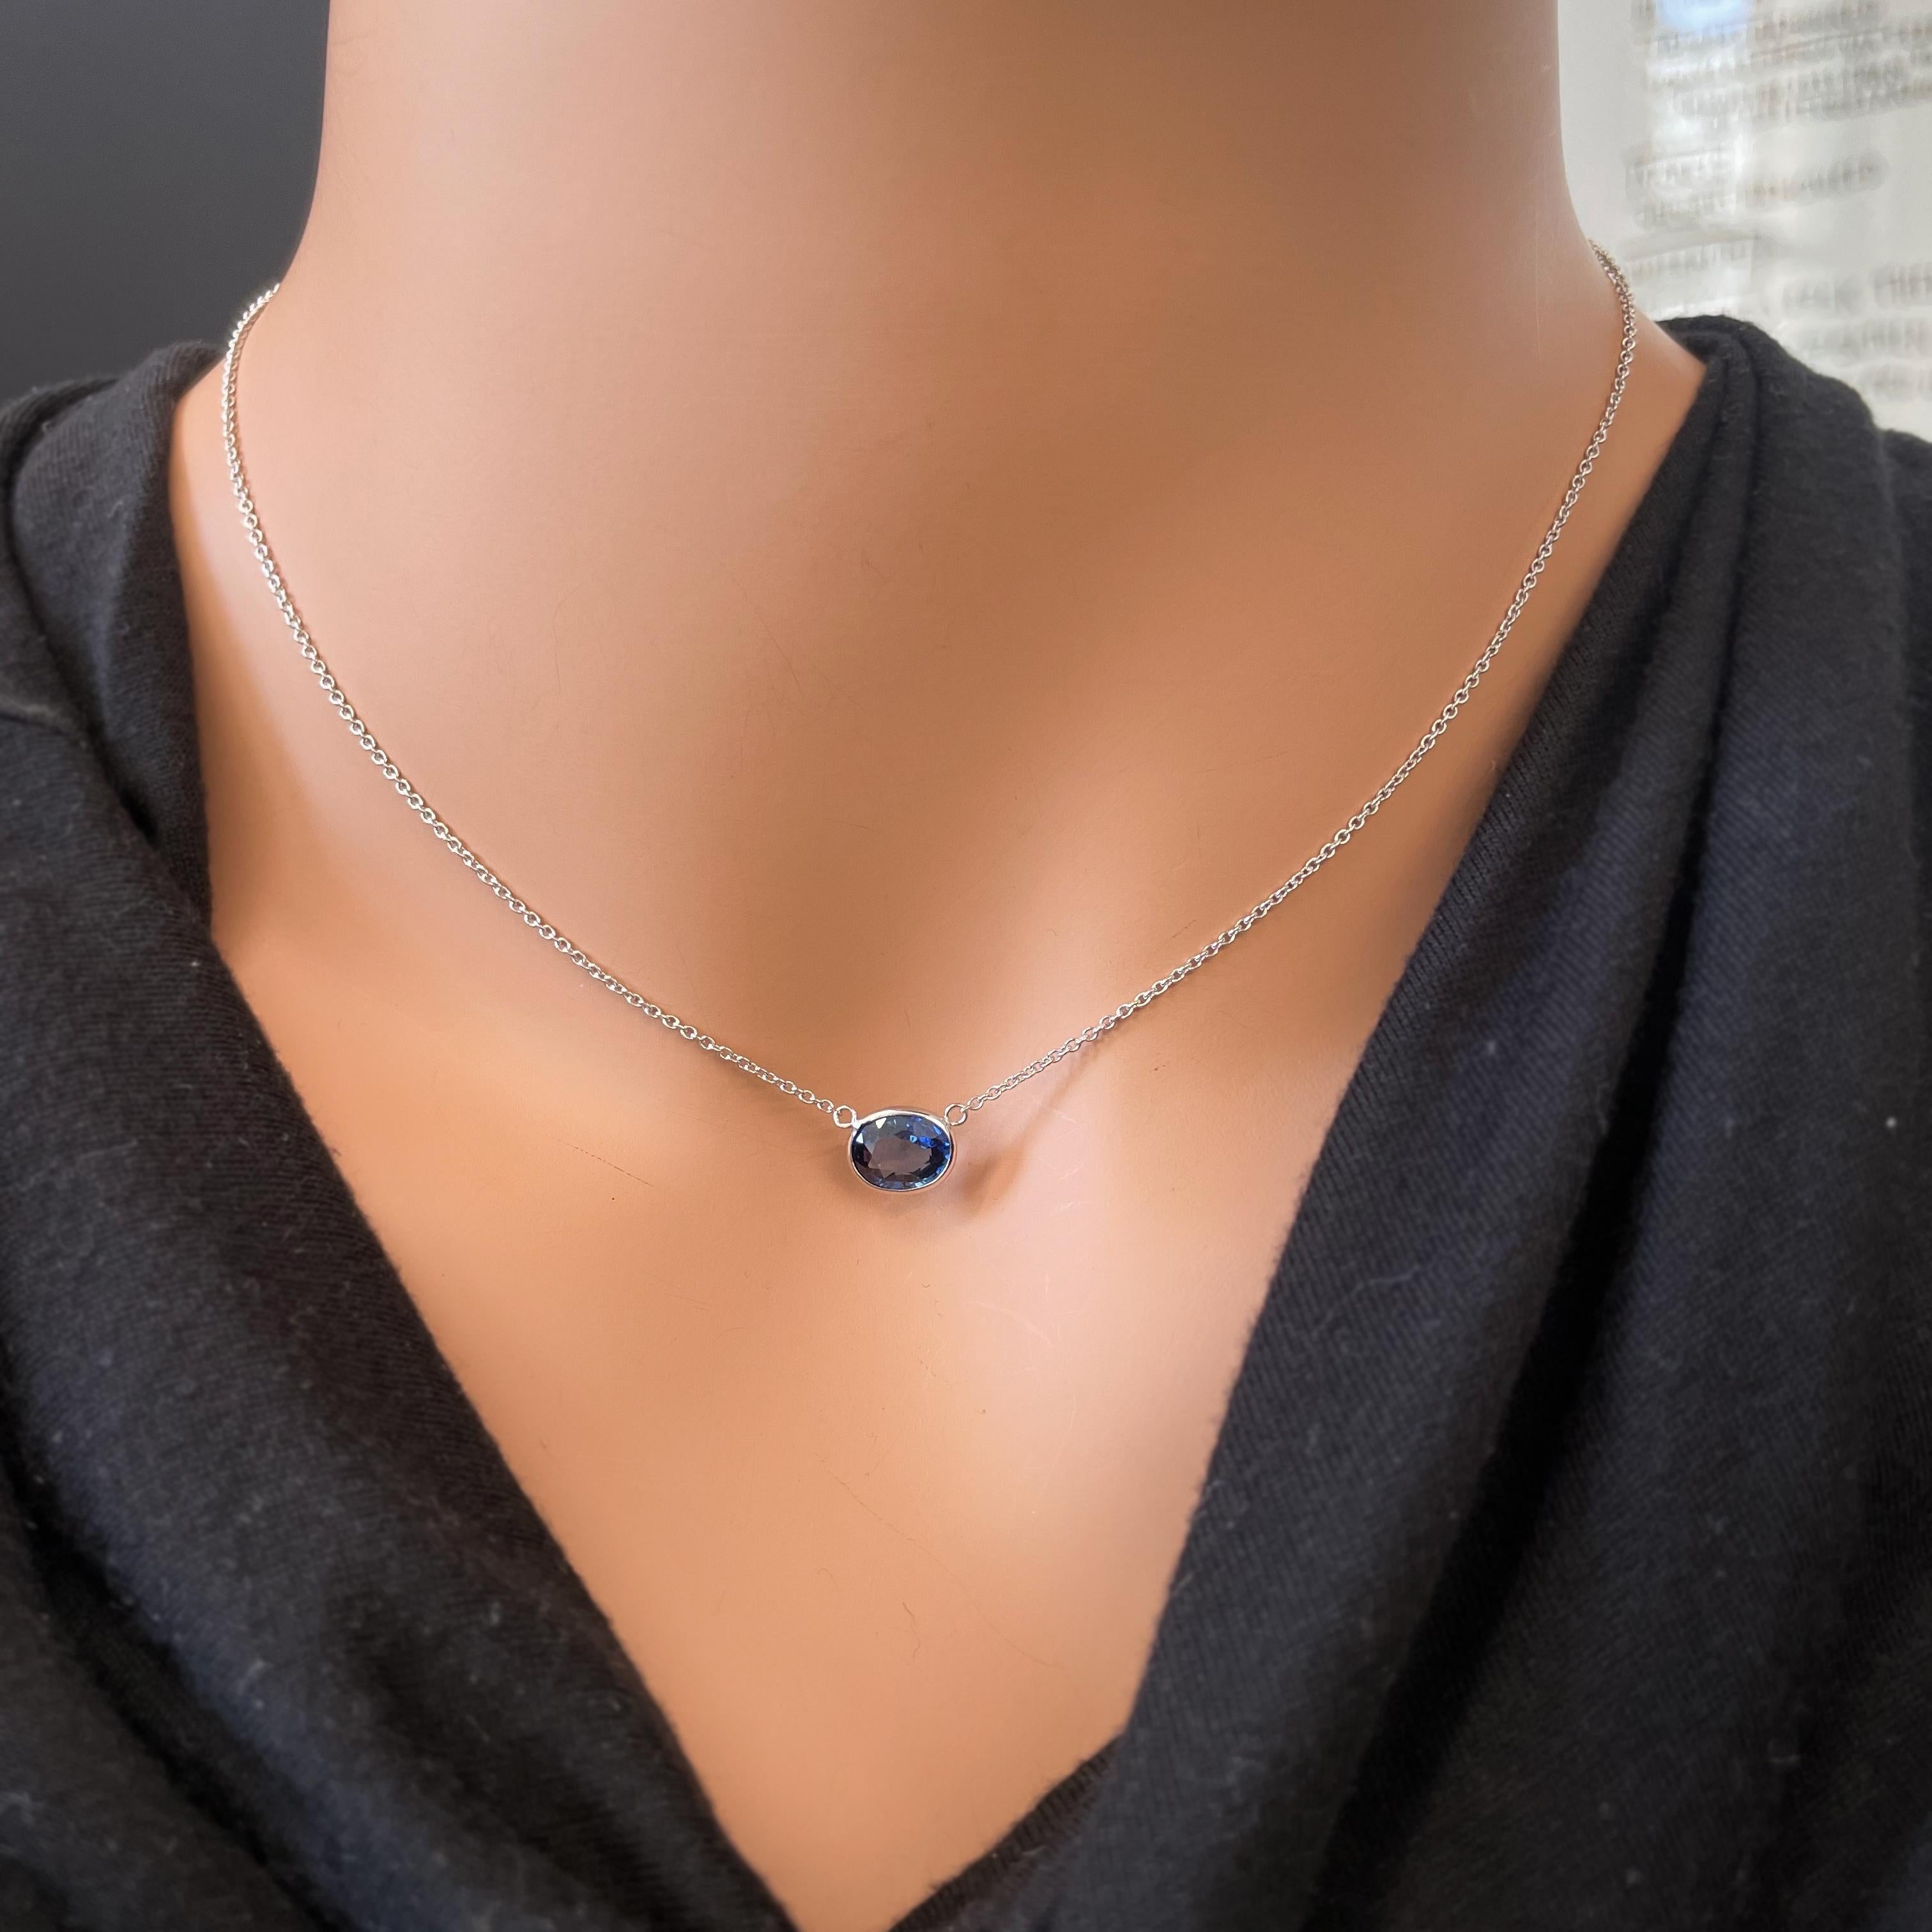 This necklace features an oval-cut blue sapphire with a weight of 2.19 carats, set in 14k white gold (WG). Blue sapphires are highly sought after for their rich, deep blue color, and the oval cut is a classic and timeless choice for gemstones,